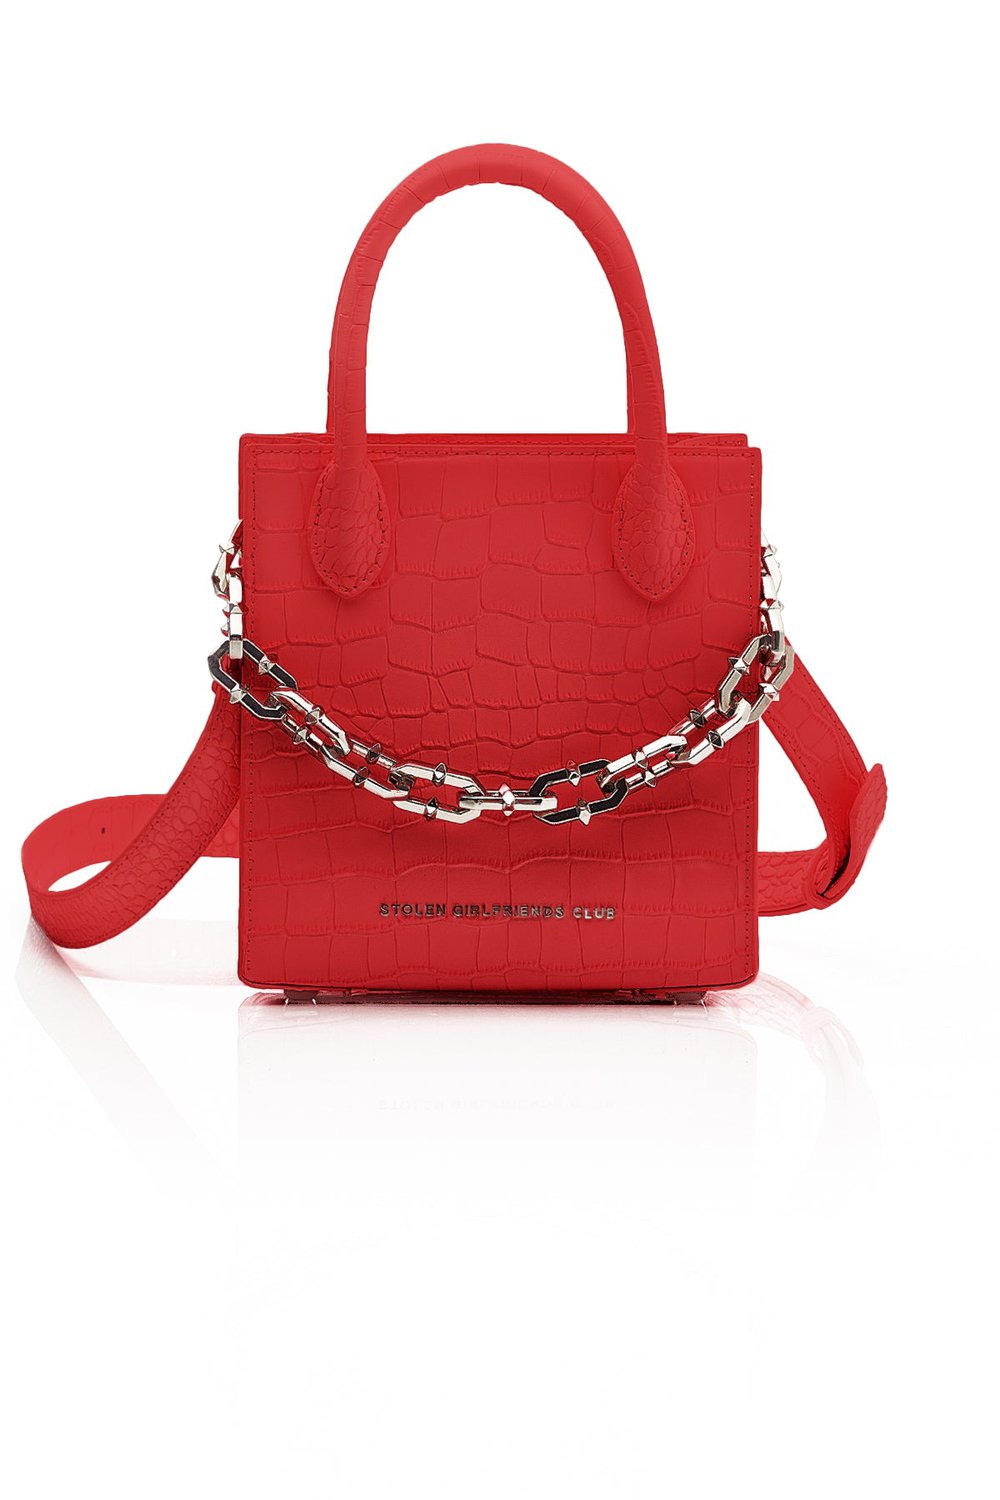 Stolen Girlfriends Club Tour Buddy Tote Cherry Leather_0